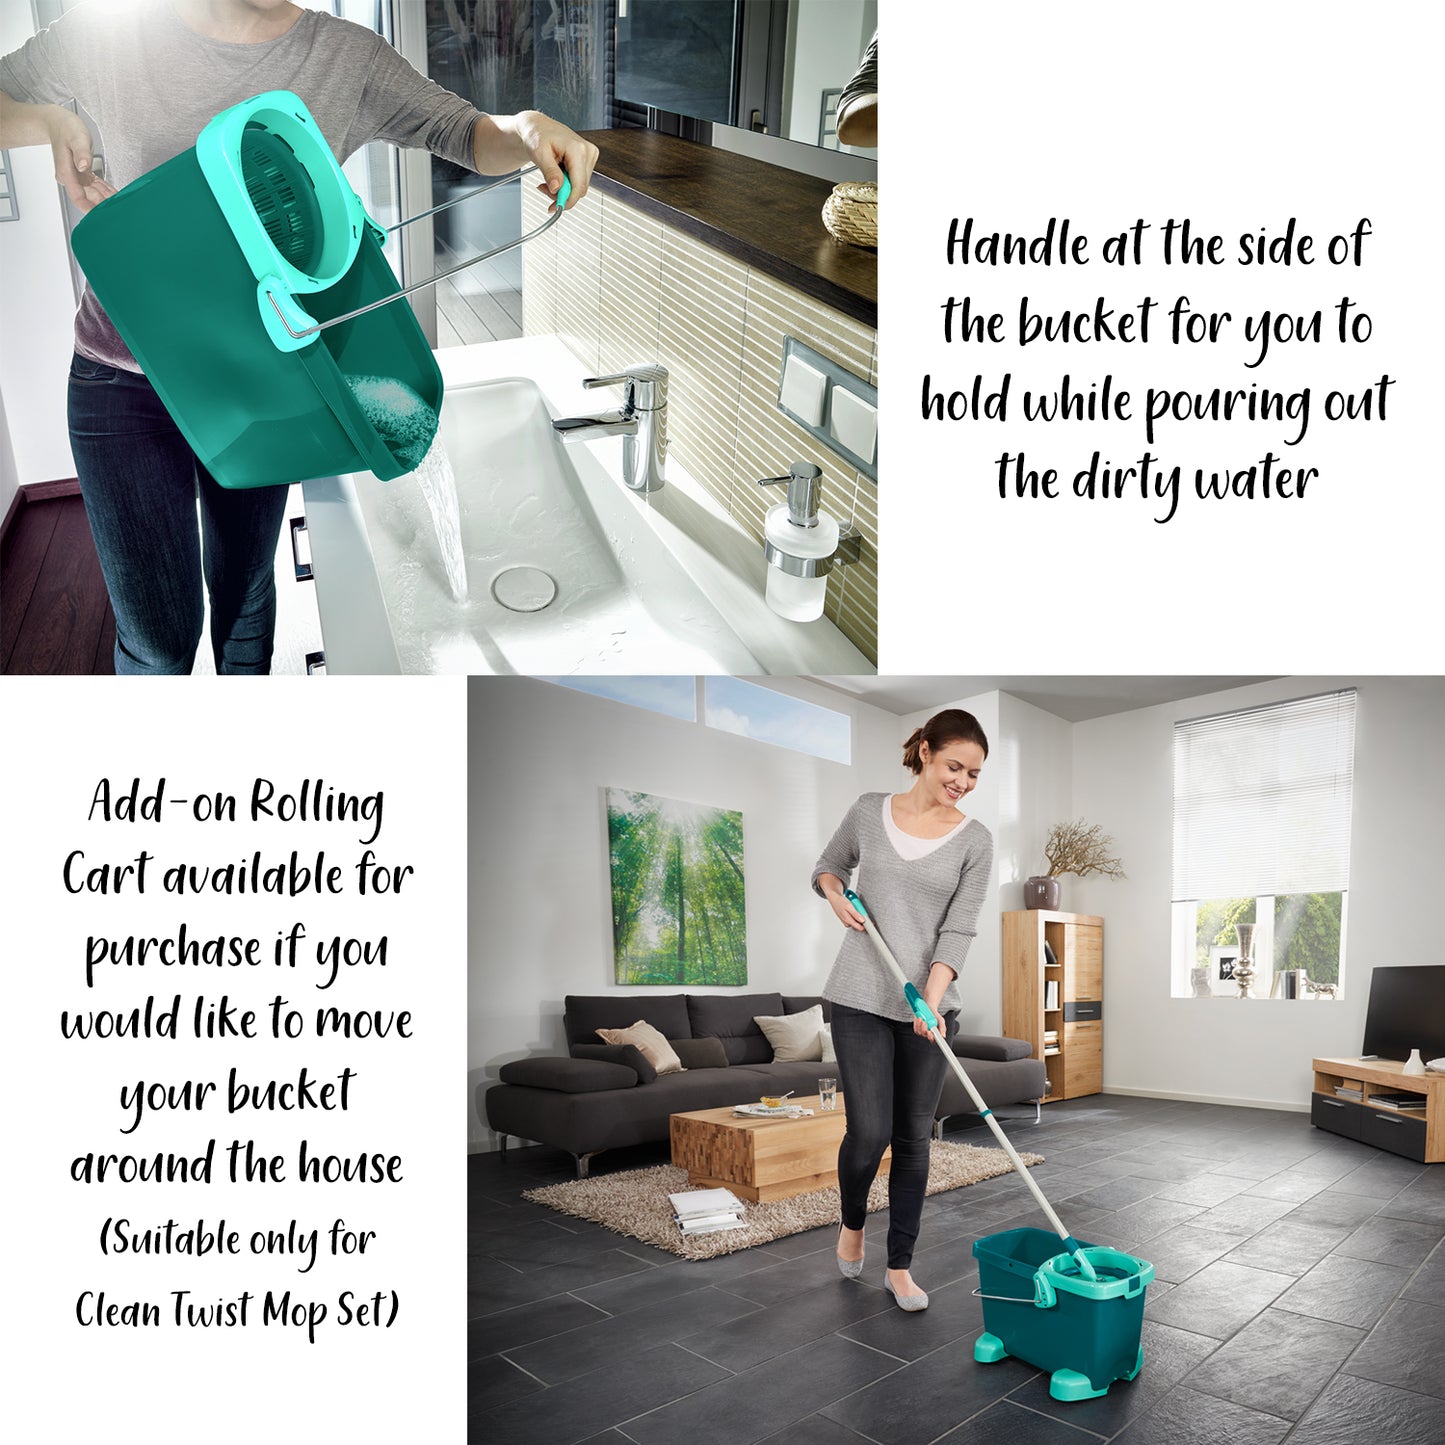 Clean Twist Ergo Mop Set!, Everything you need to know about Leifheit  Clean Twist Ergo Mop Set! 🧼✨ Available for €48.95* from leading outlets.  *Recommended Retail Price, By Leifheit Malta